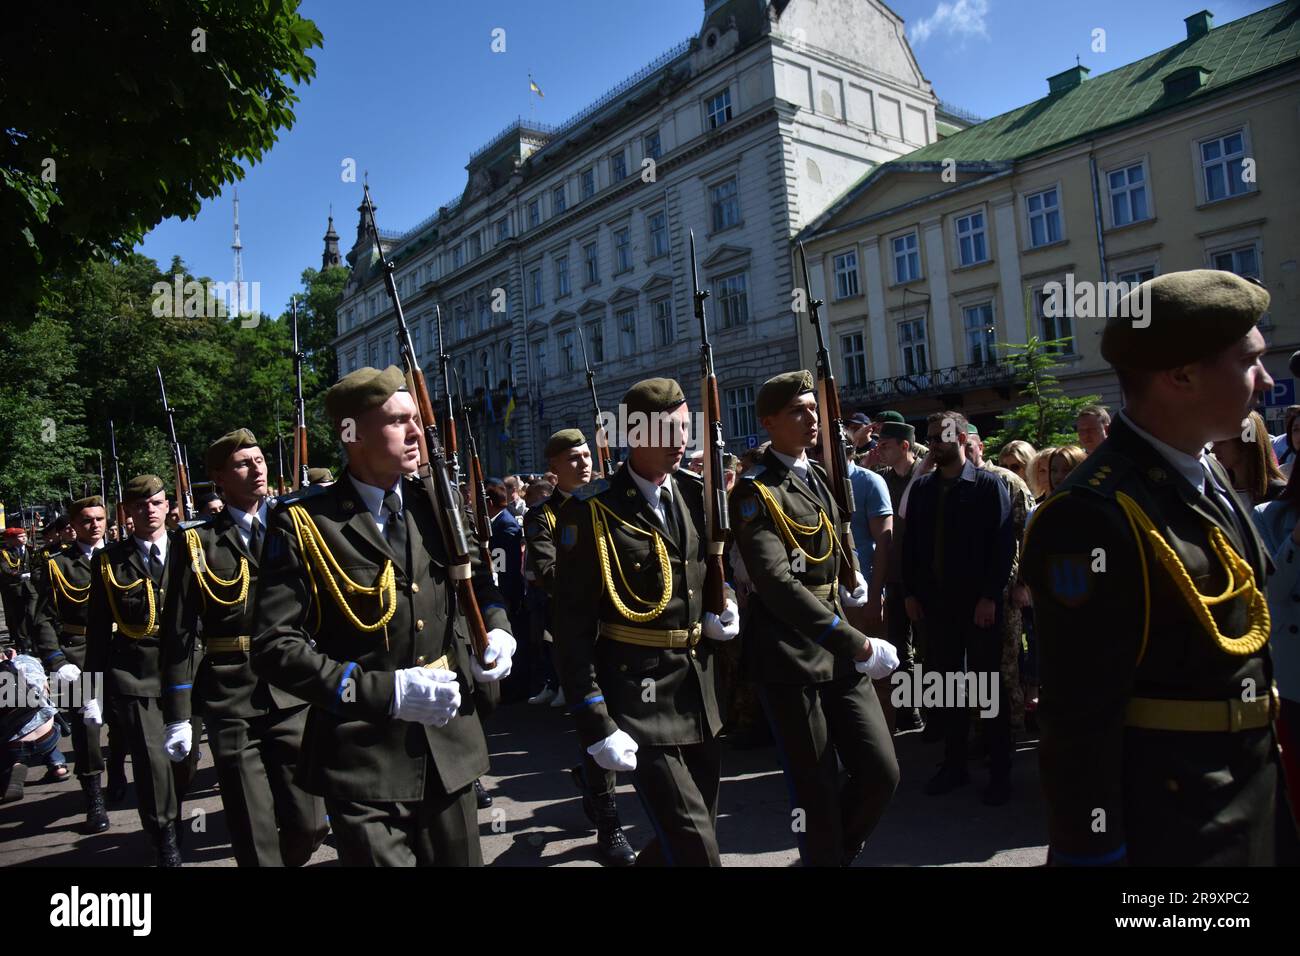 Cadets from the honor guard march during the celebration of the Constitution Day of Ukraine. Ukraine celebrated the 27th anniversary of the adoption of the country's basic law - the constitution. In the conditions of the Russian-Ukrainian war, official events were very short. In Lviv, the Ukrainian flag was raised, honor guard marched, and a military band performed. (Photo by Pavlo Palamarchuk / SOPA mages/Sipa USA) Stock Photo